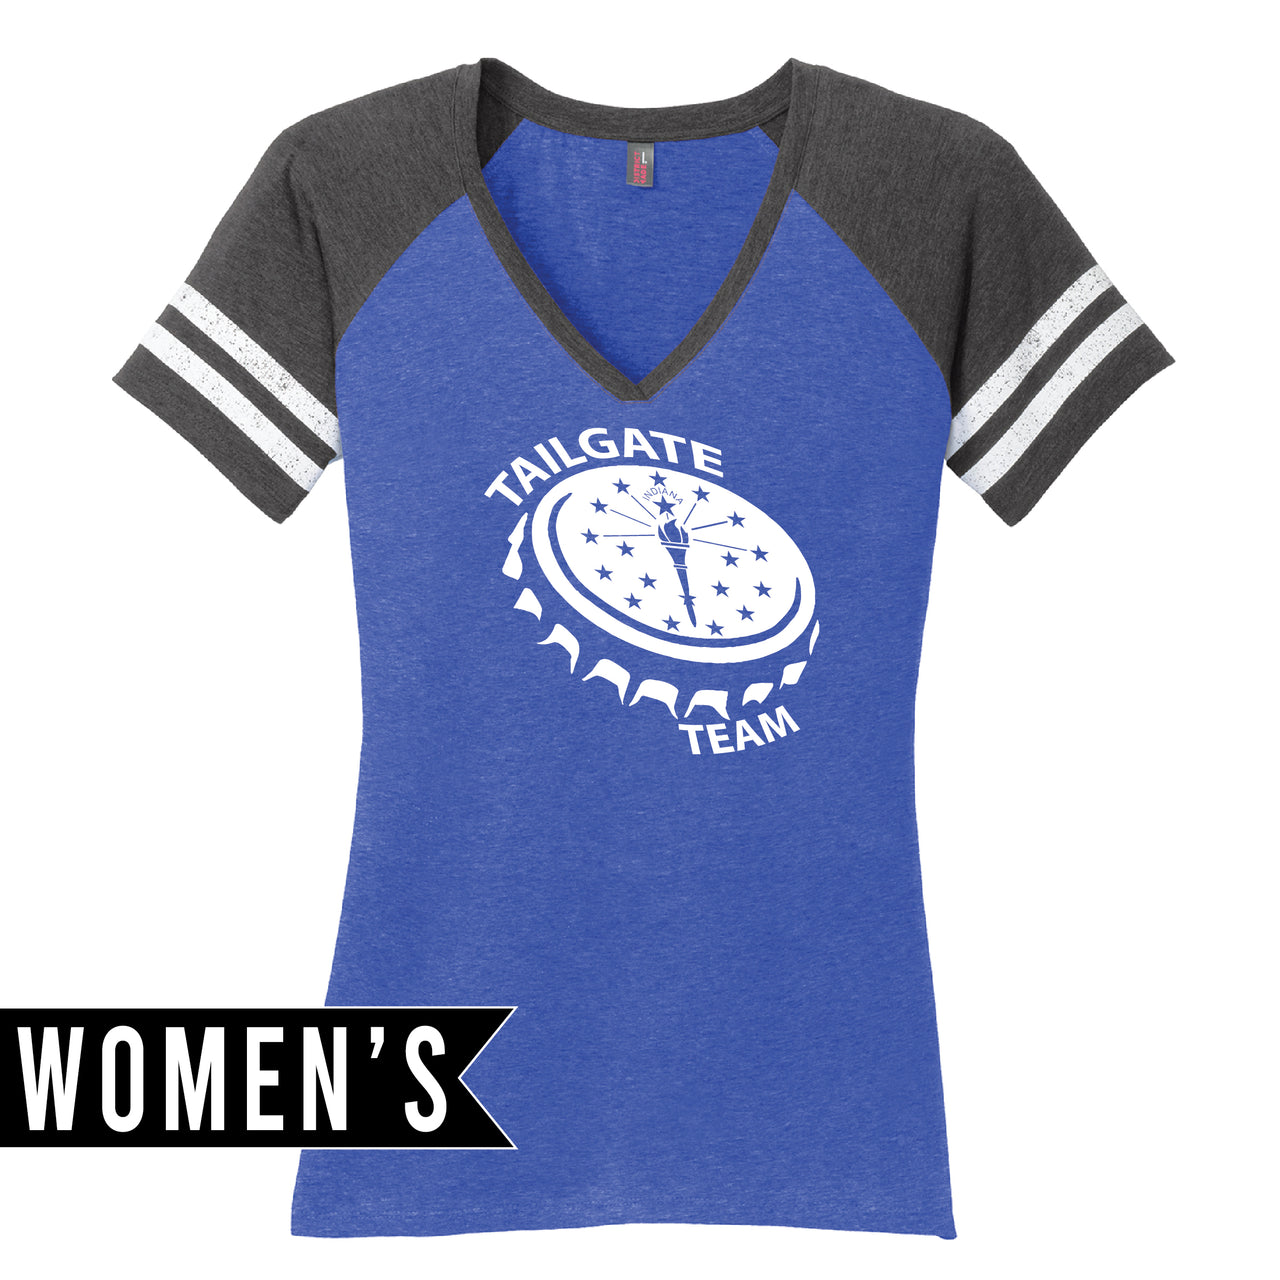 Women’s Game V-Neck Tee - Indiana Tailgate